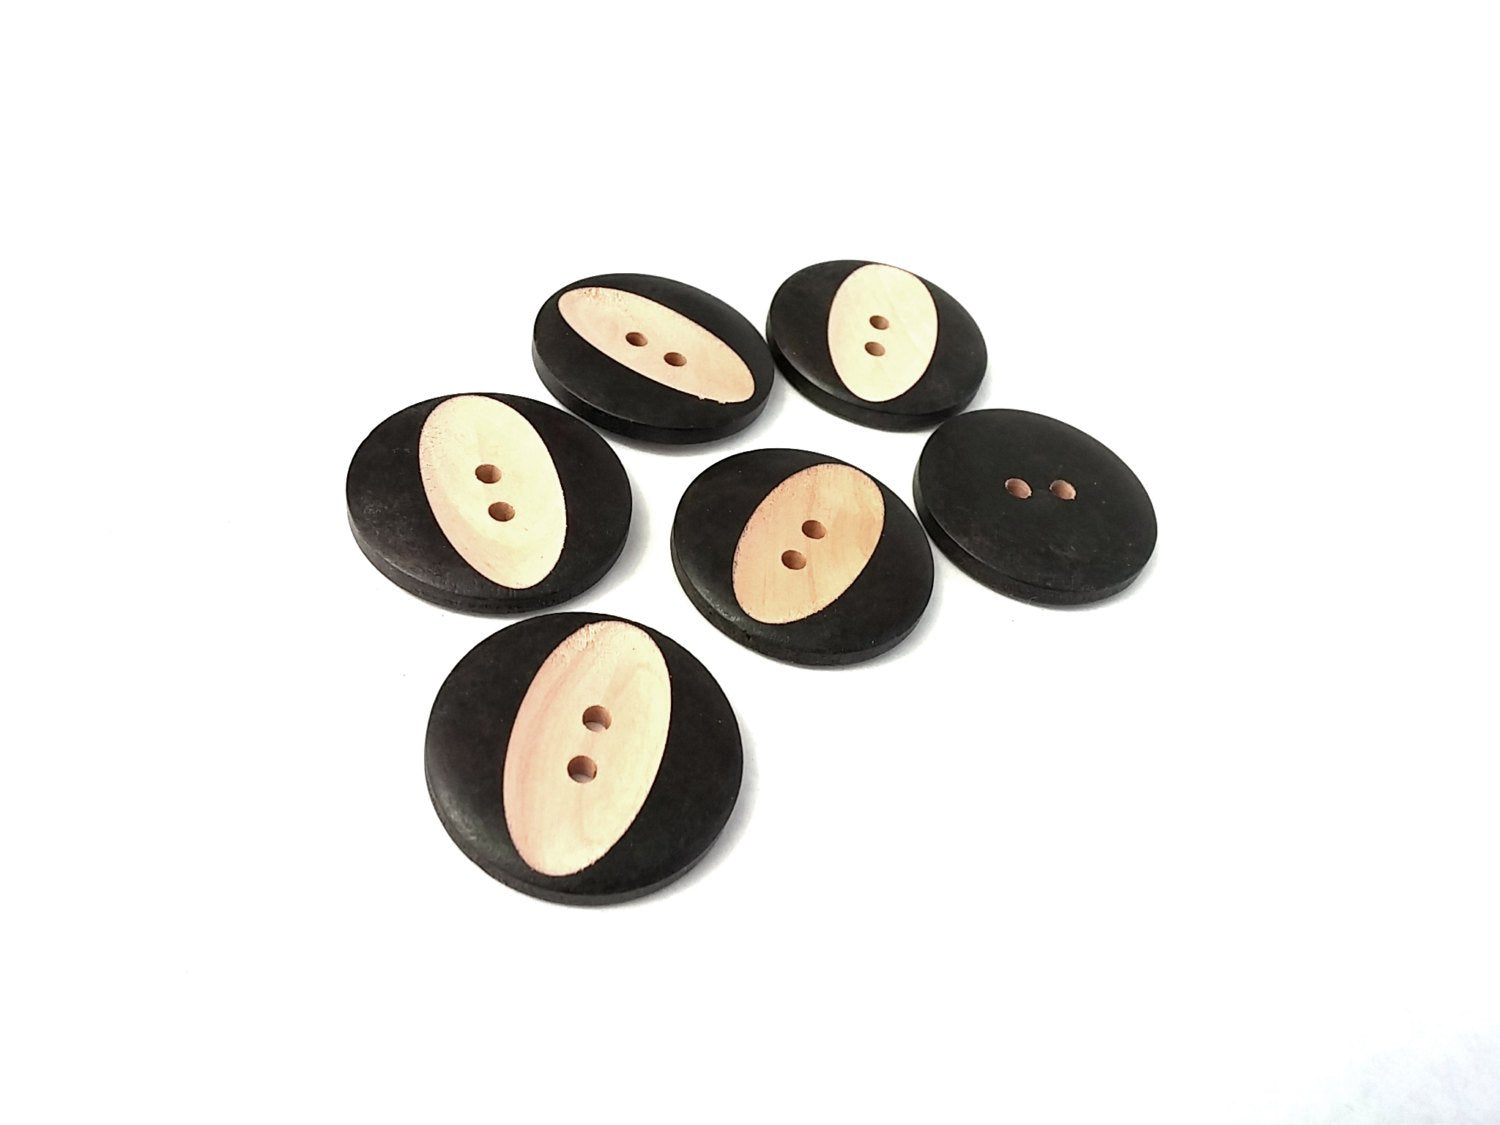 Carved Wooden Sewing Buttons 30mm - set of 6 wood buttons